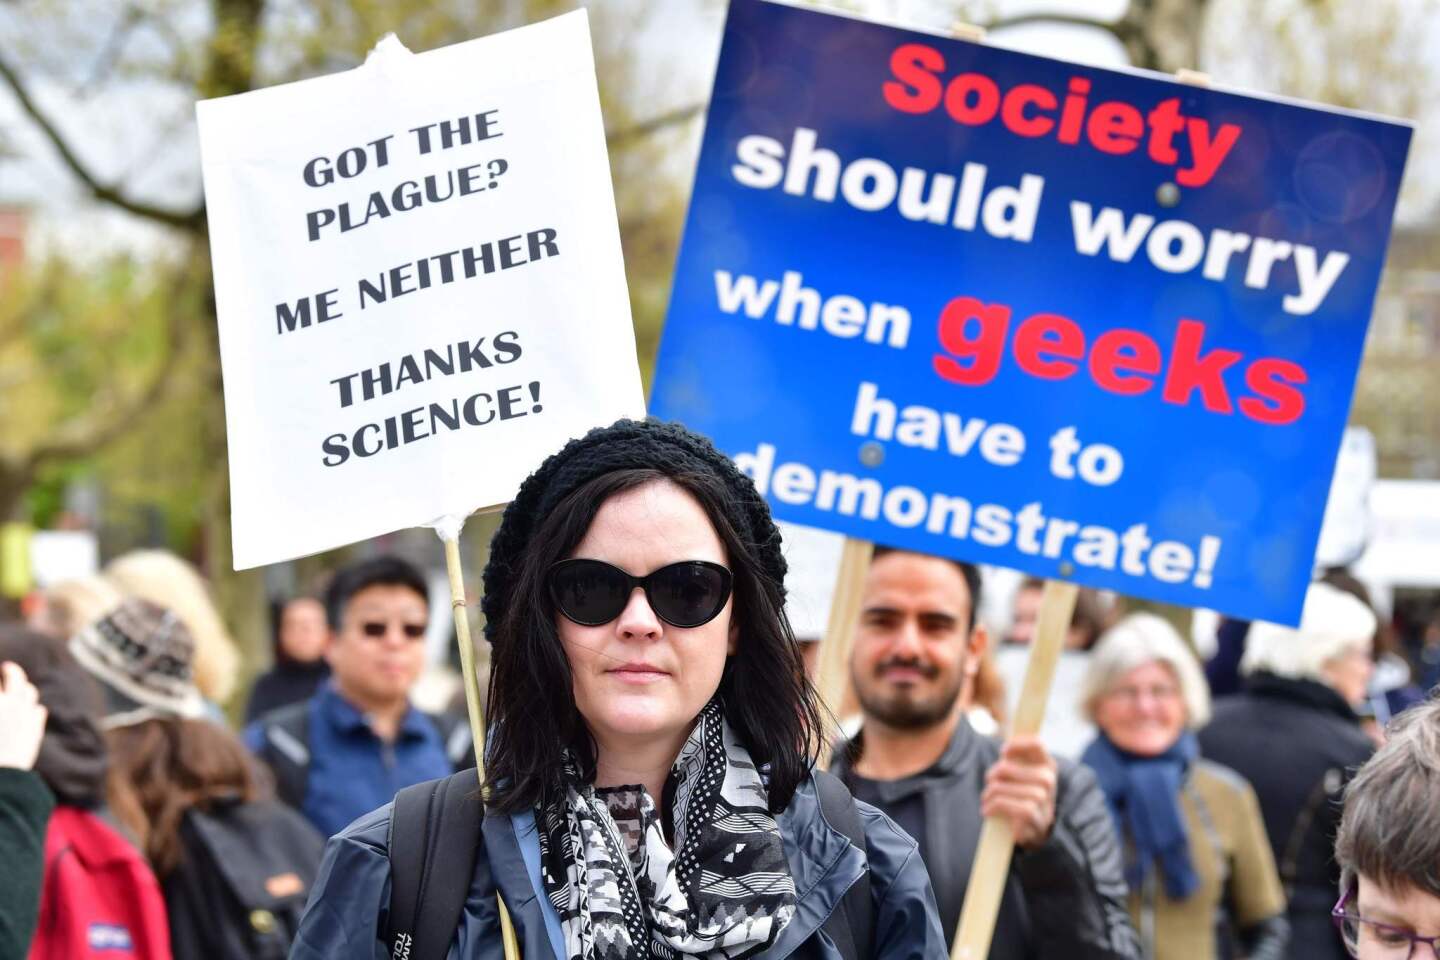 Dutch science fans carry signs in the March for Science in Amsterdam.